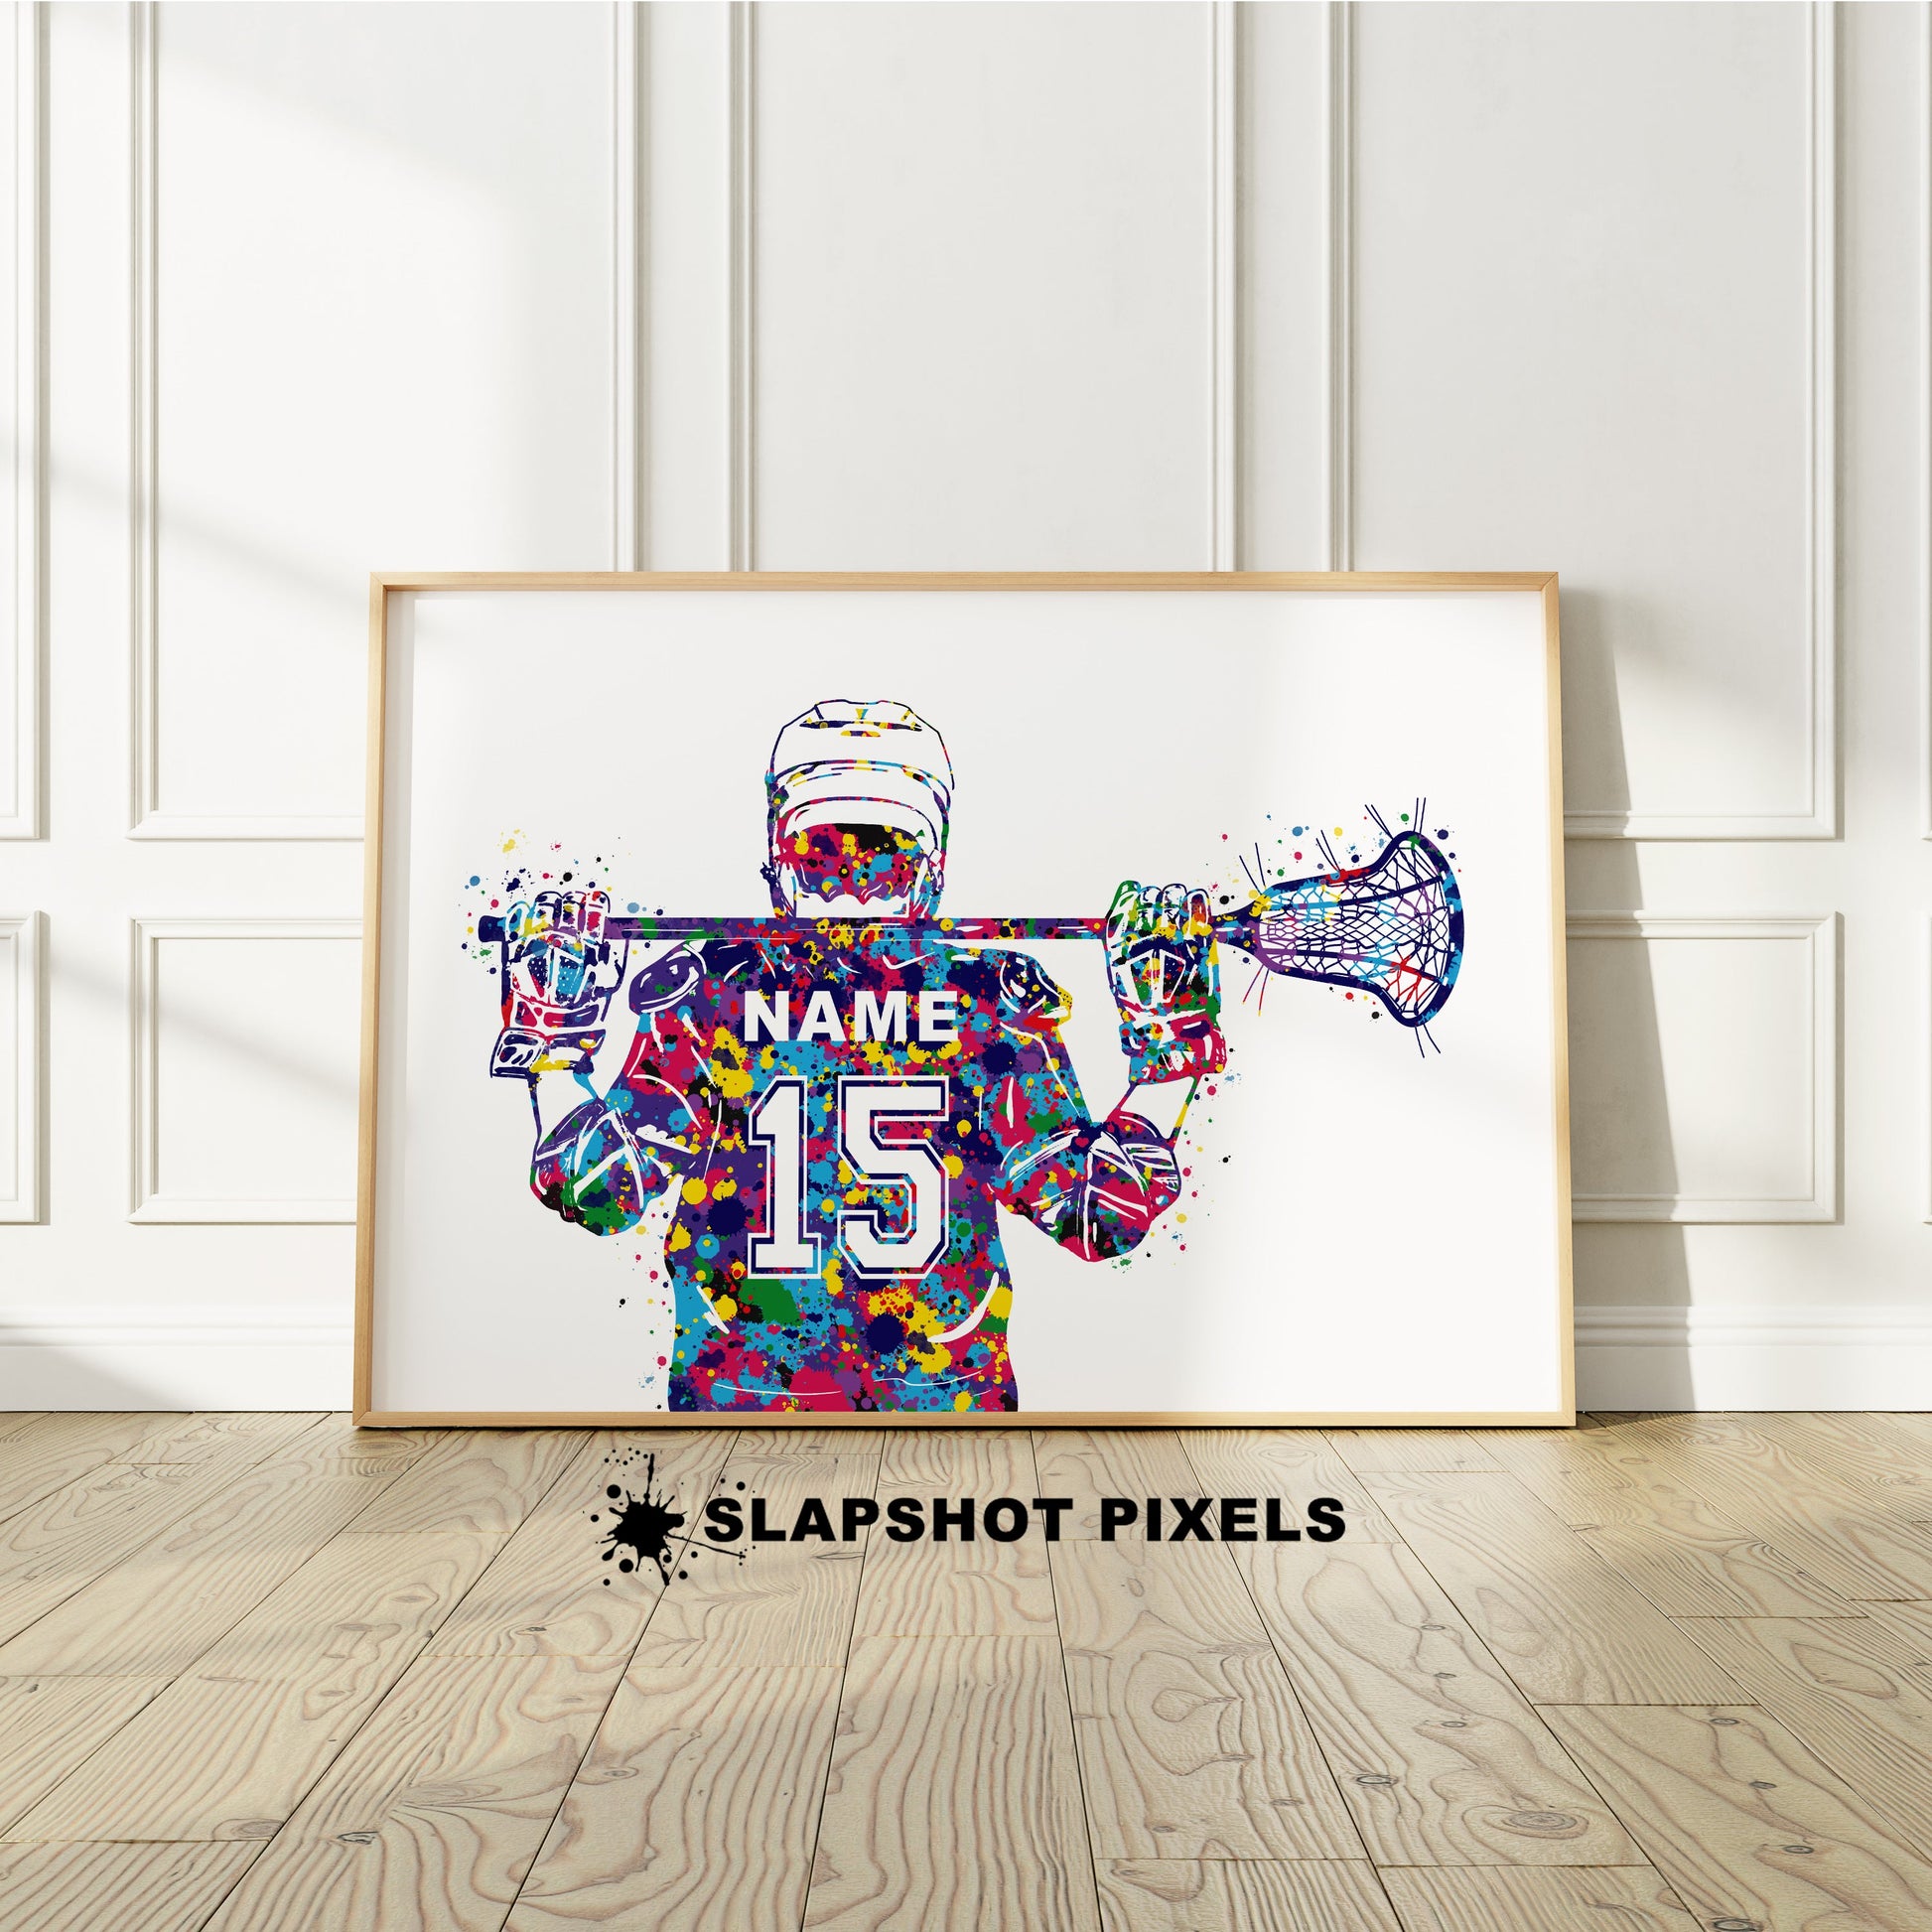 Personalized lacrosse poster showing back of a boy lacrosse player with custom name and number on the lacrosse jersey. Designed in watercolor splatters. Perfect lacrosse gifts for boys, lacrosse prints, lacrosse team gifts, lacrosse coach gift, lacrosse wall art décor in a lacrosse bedroom and birthday gifts for lacrosse players.